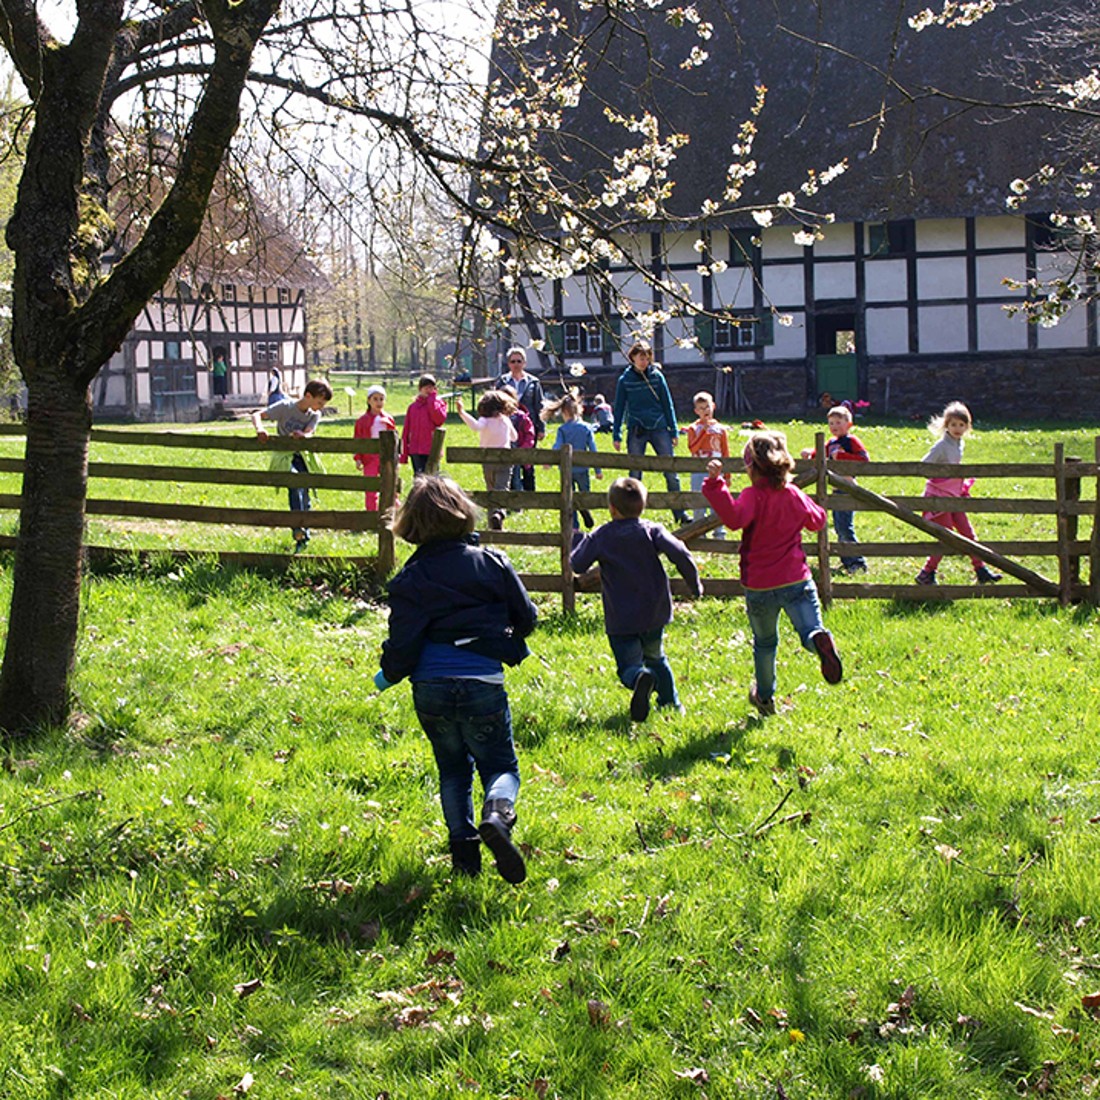 Children run across a meadow, in the background you can see half-timbered houses